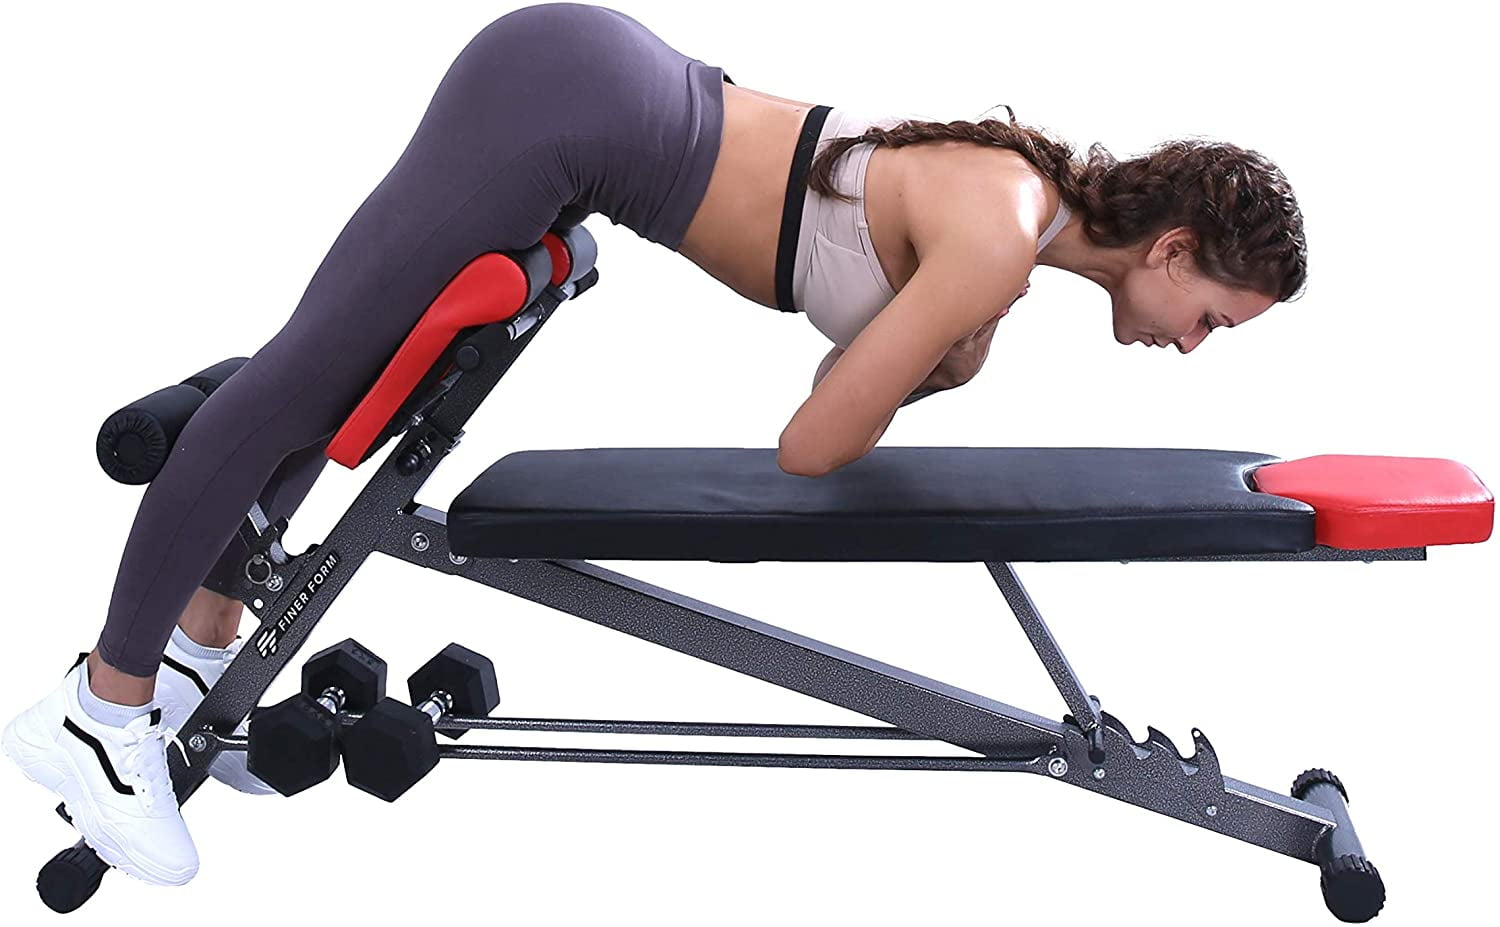 Finer Form Multi-Functional Bench for Full All-in-One Body Workout